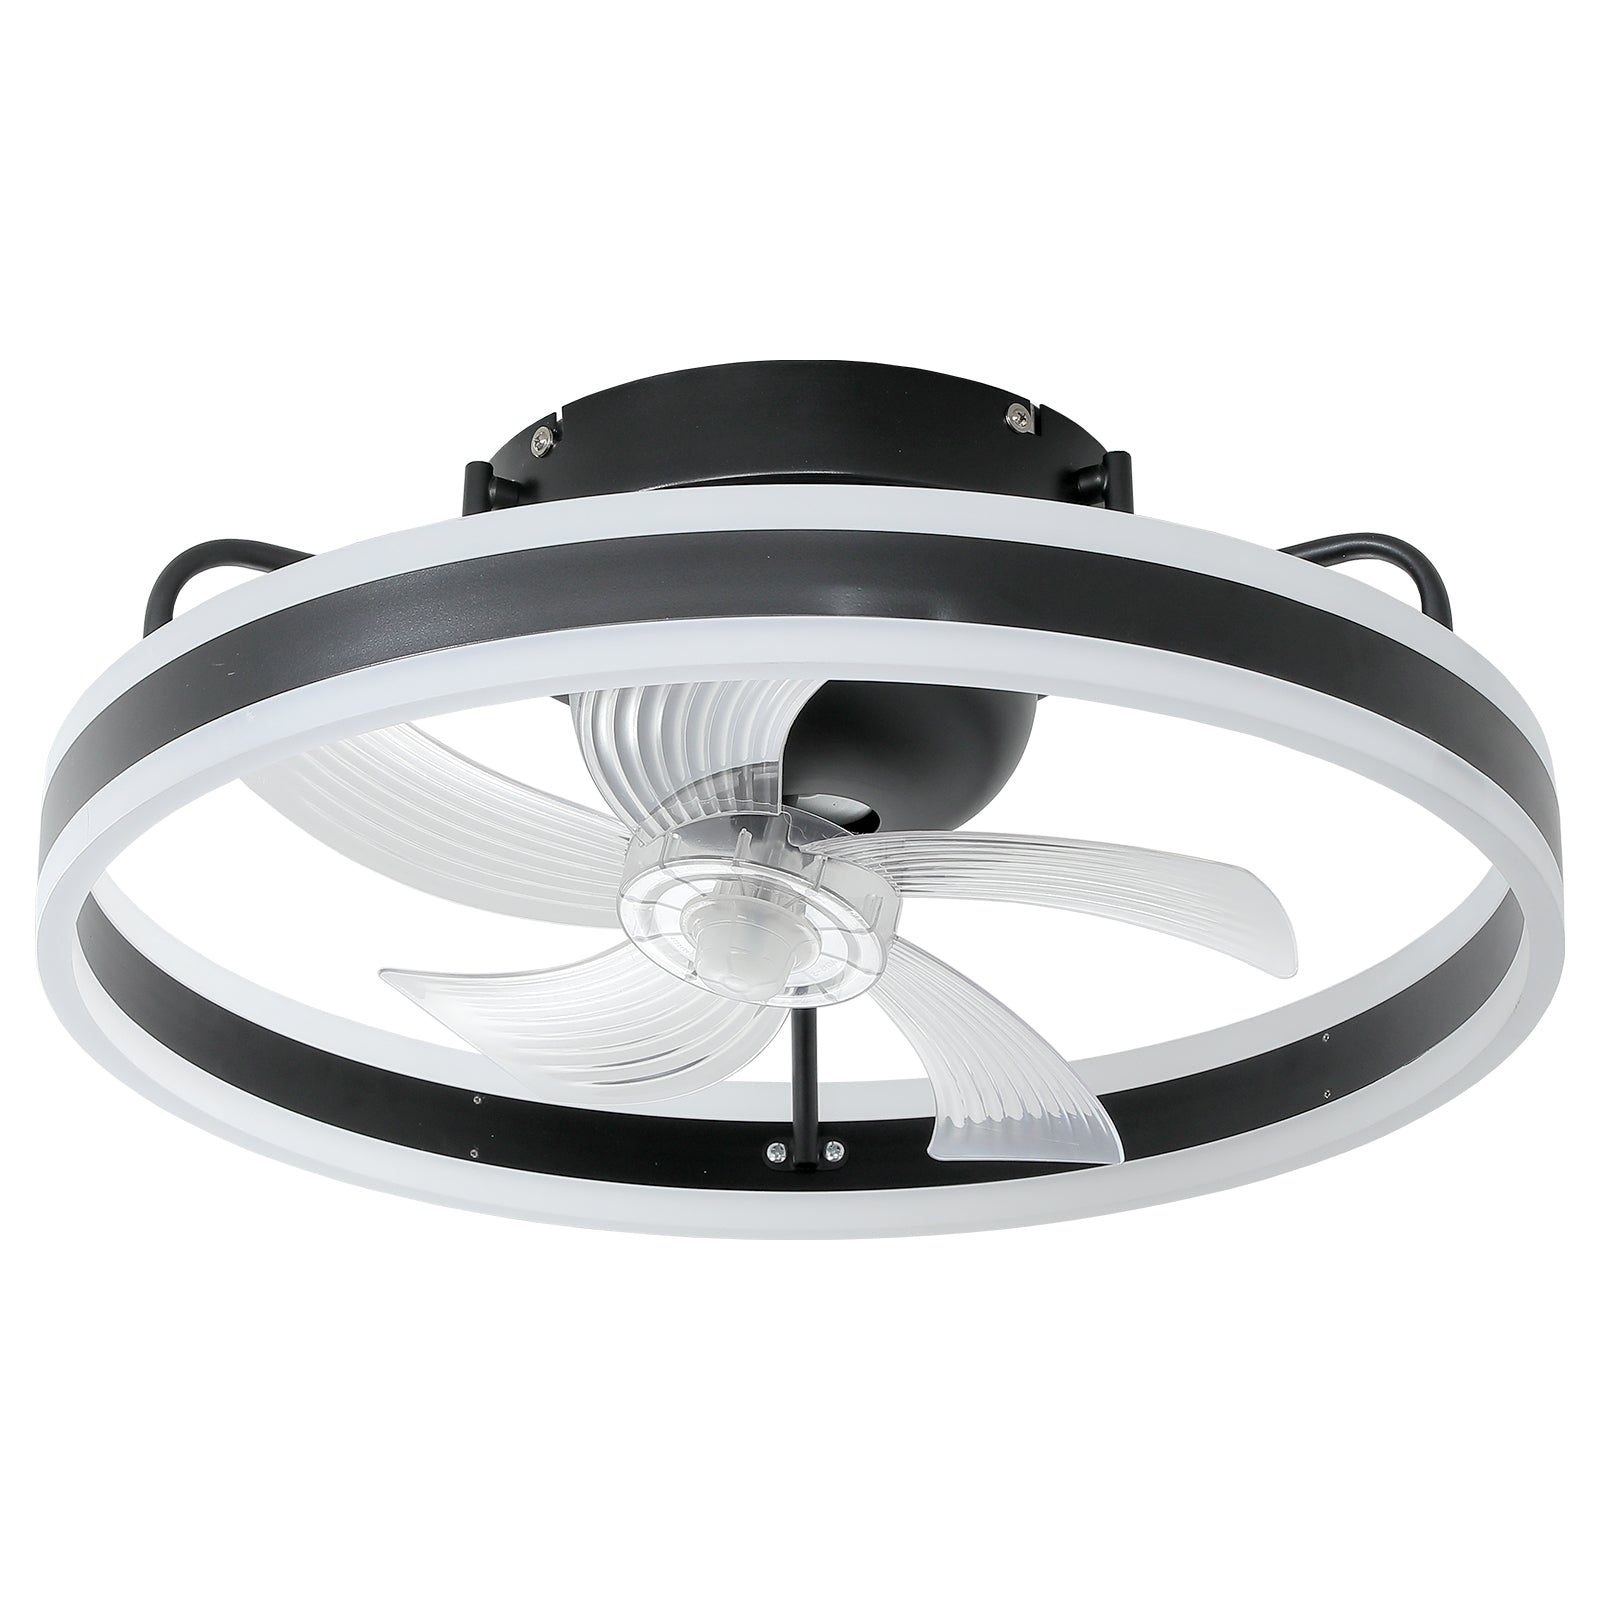 360 ° Shake your head Ceiling Fans with Lights With Remote, Small Black Ceiling Fan with Dimming for Bedroom（Black ）